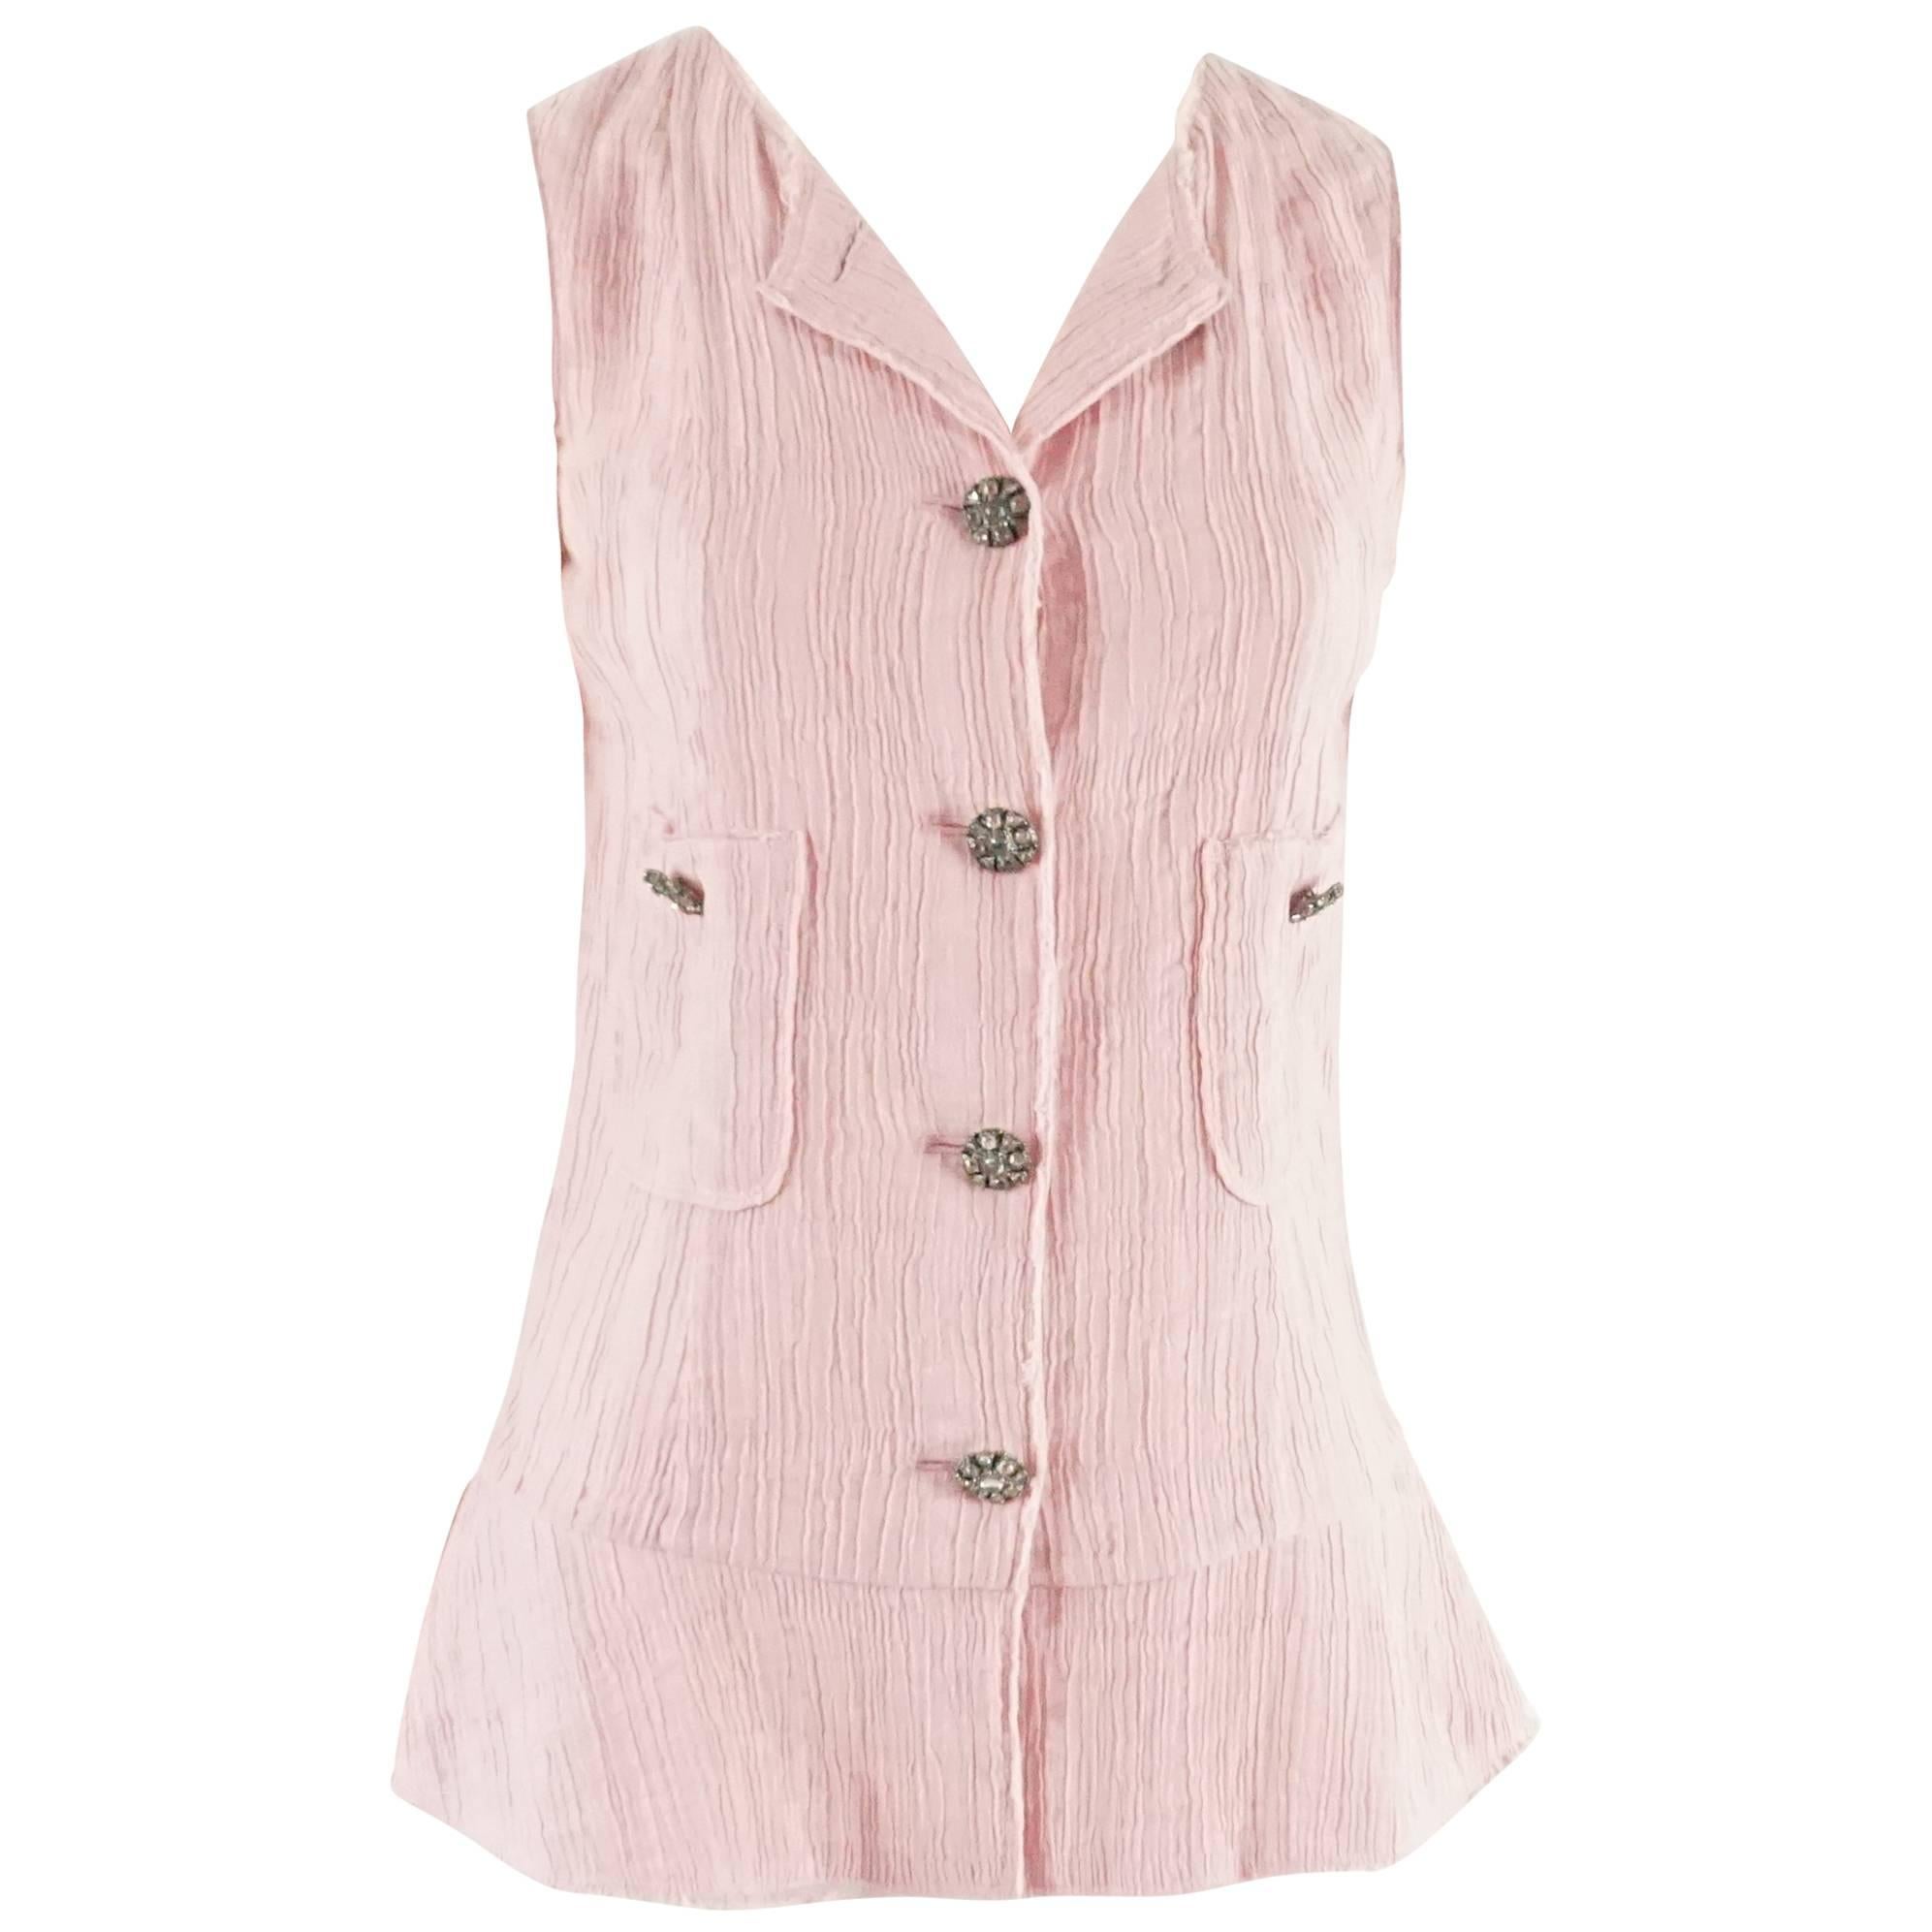 Chanel Pink Cotton Blend Top with Pink & White Gripoix Buttons - 34